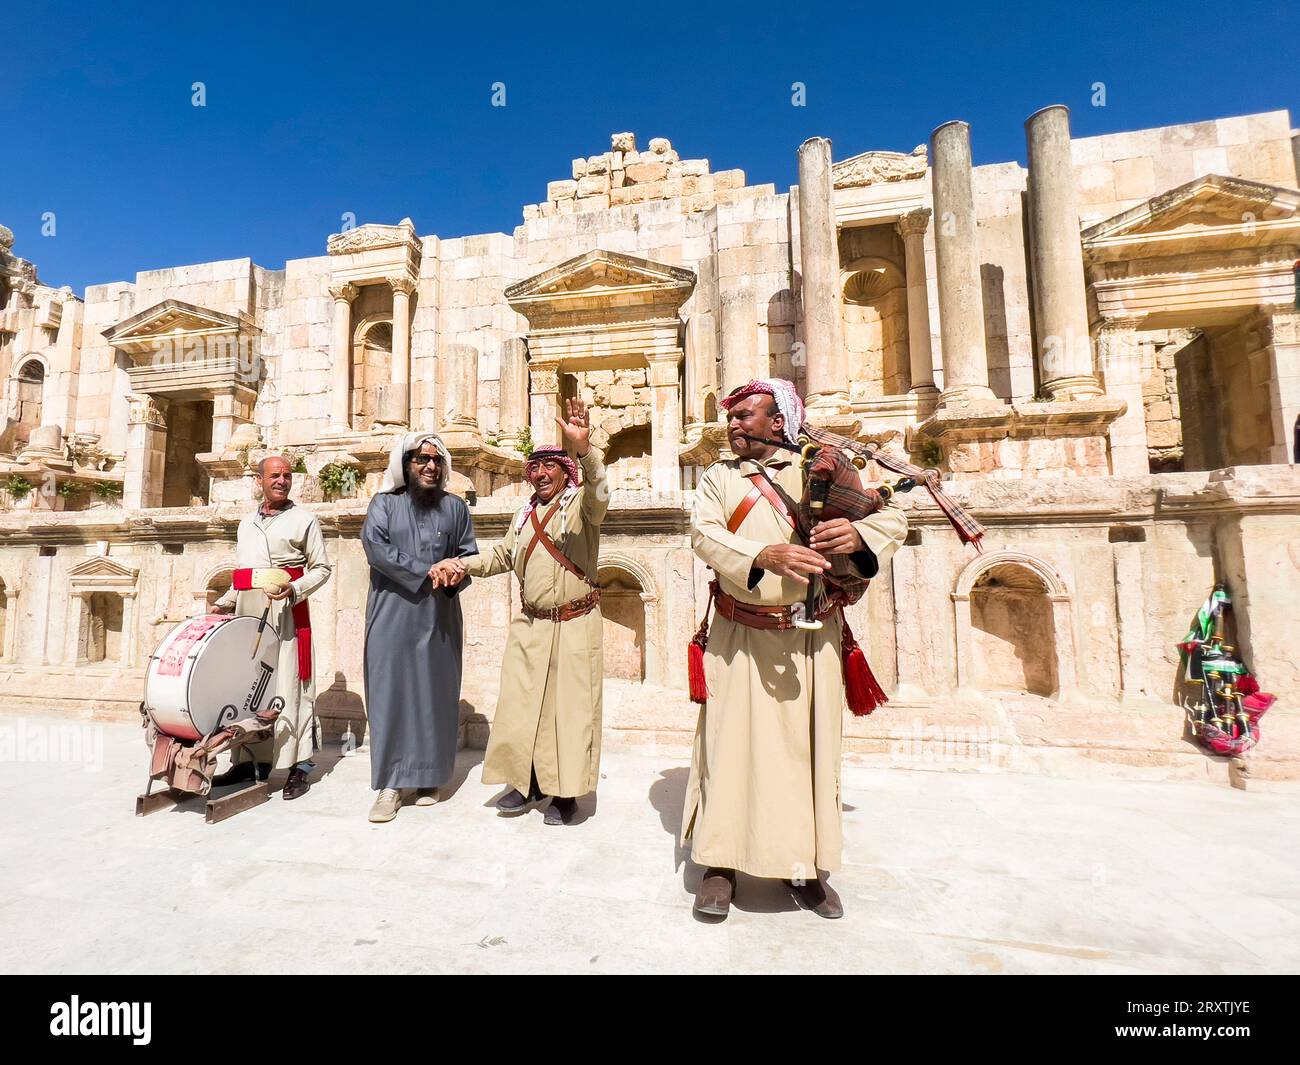 Performers at the great North Theater in the ancient city of Jerash, believed to be founded by Alexander the Great, Jerash, Jordan, Middle East Stock Photo